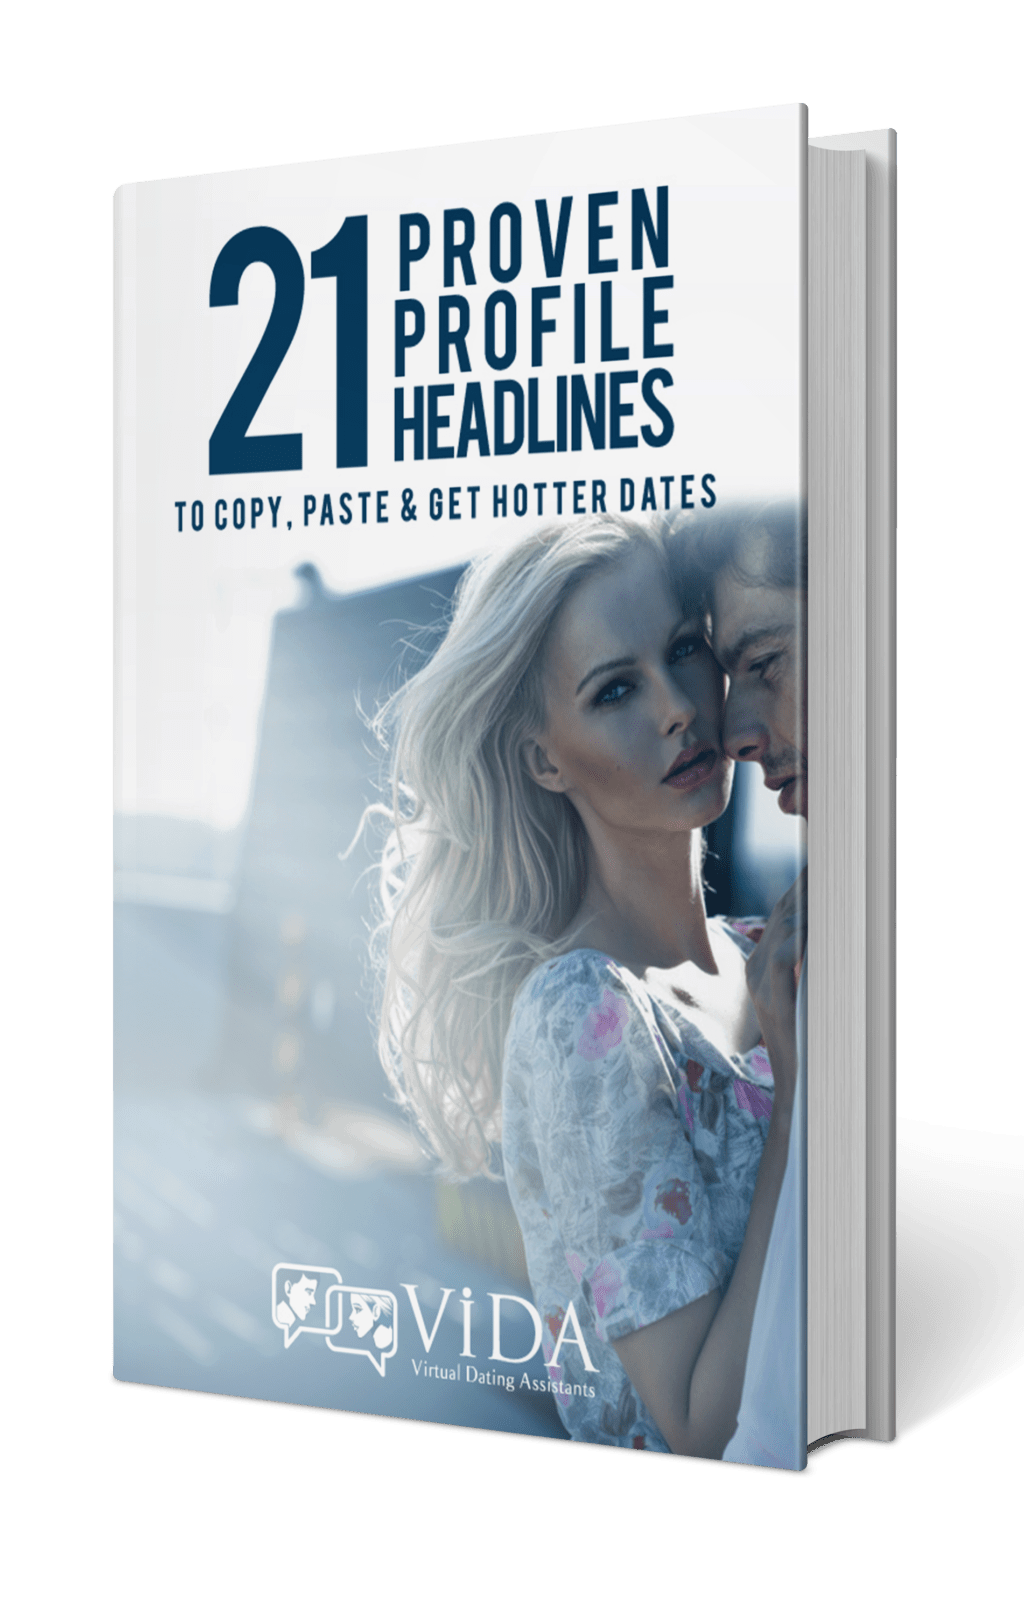 hookup profile headline tips for dating younger woman